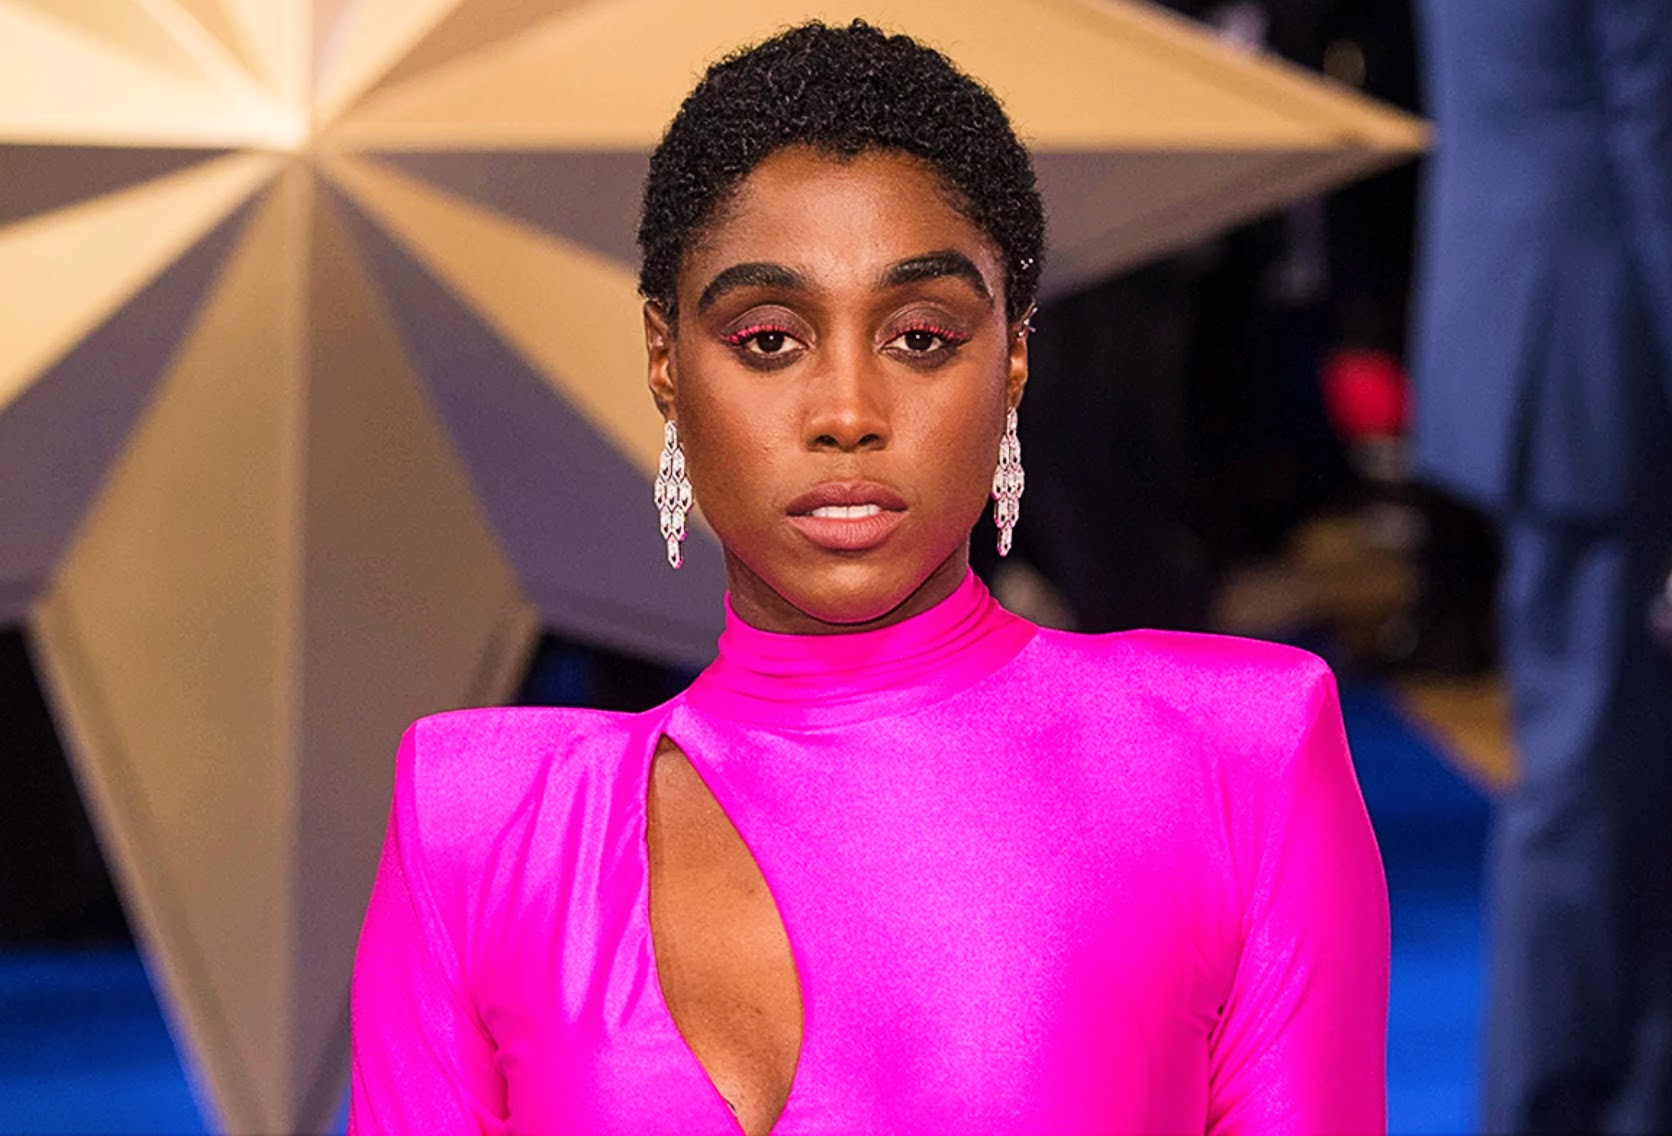 Lashana Lynch, 007 No Time to Die star, breaks barriers as the first female 007